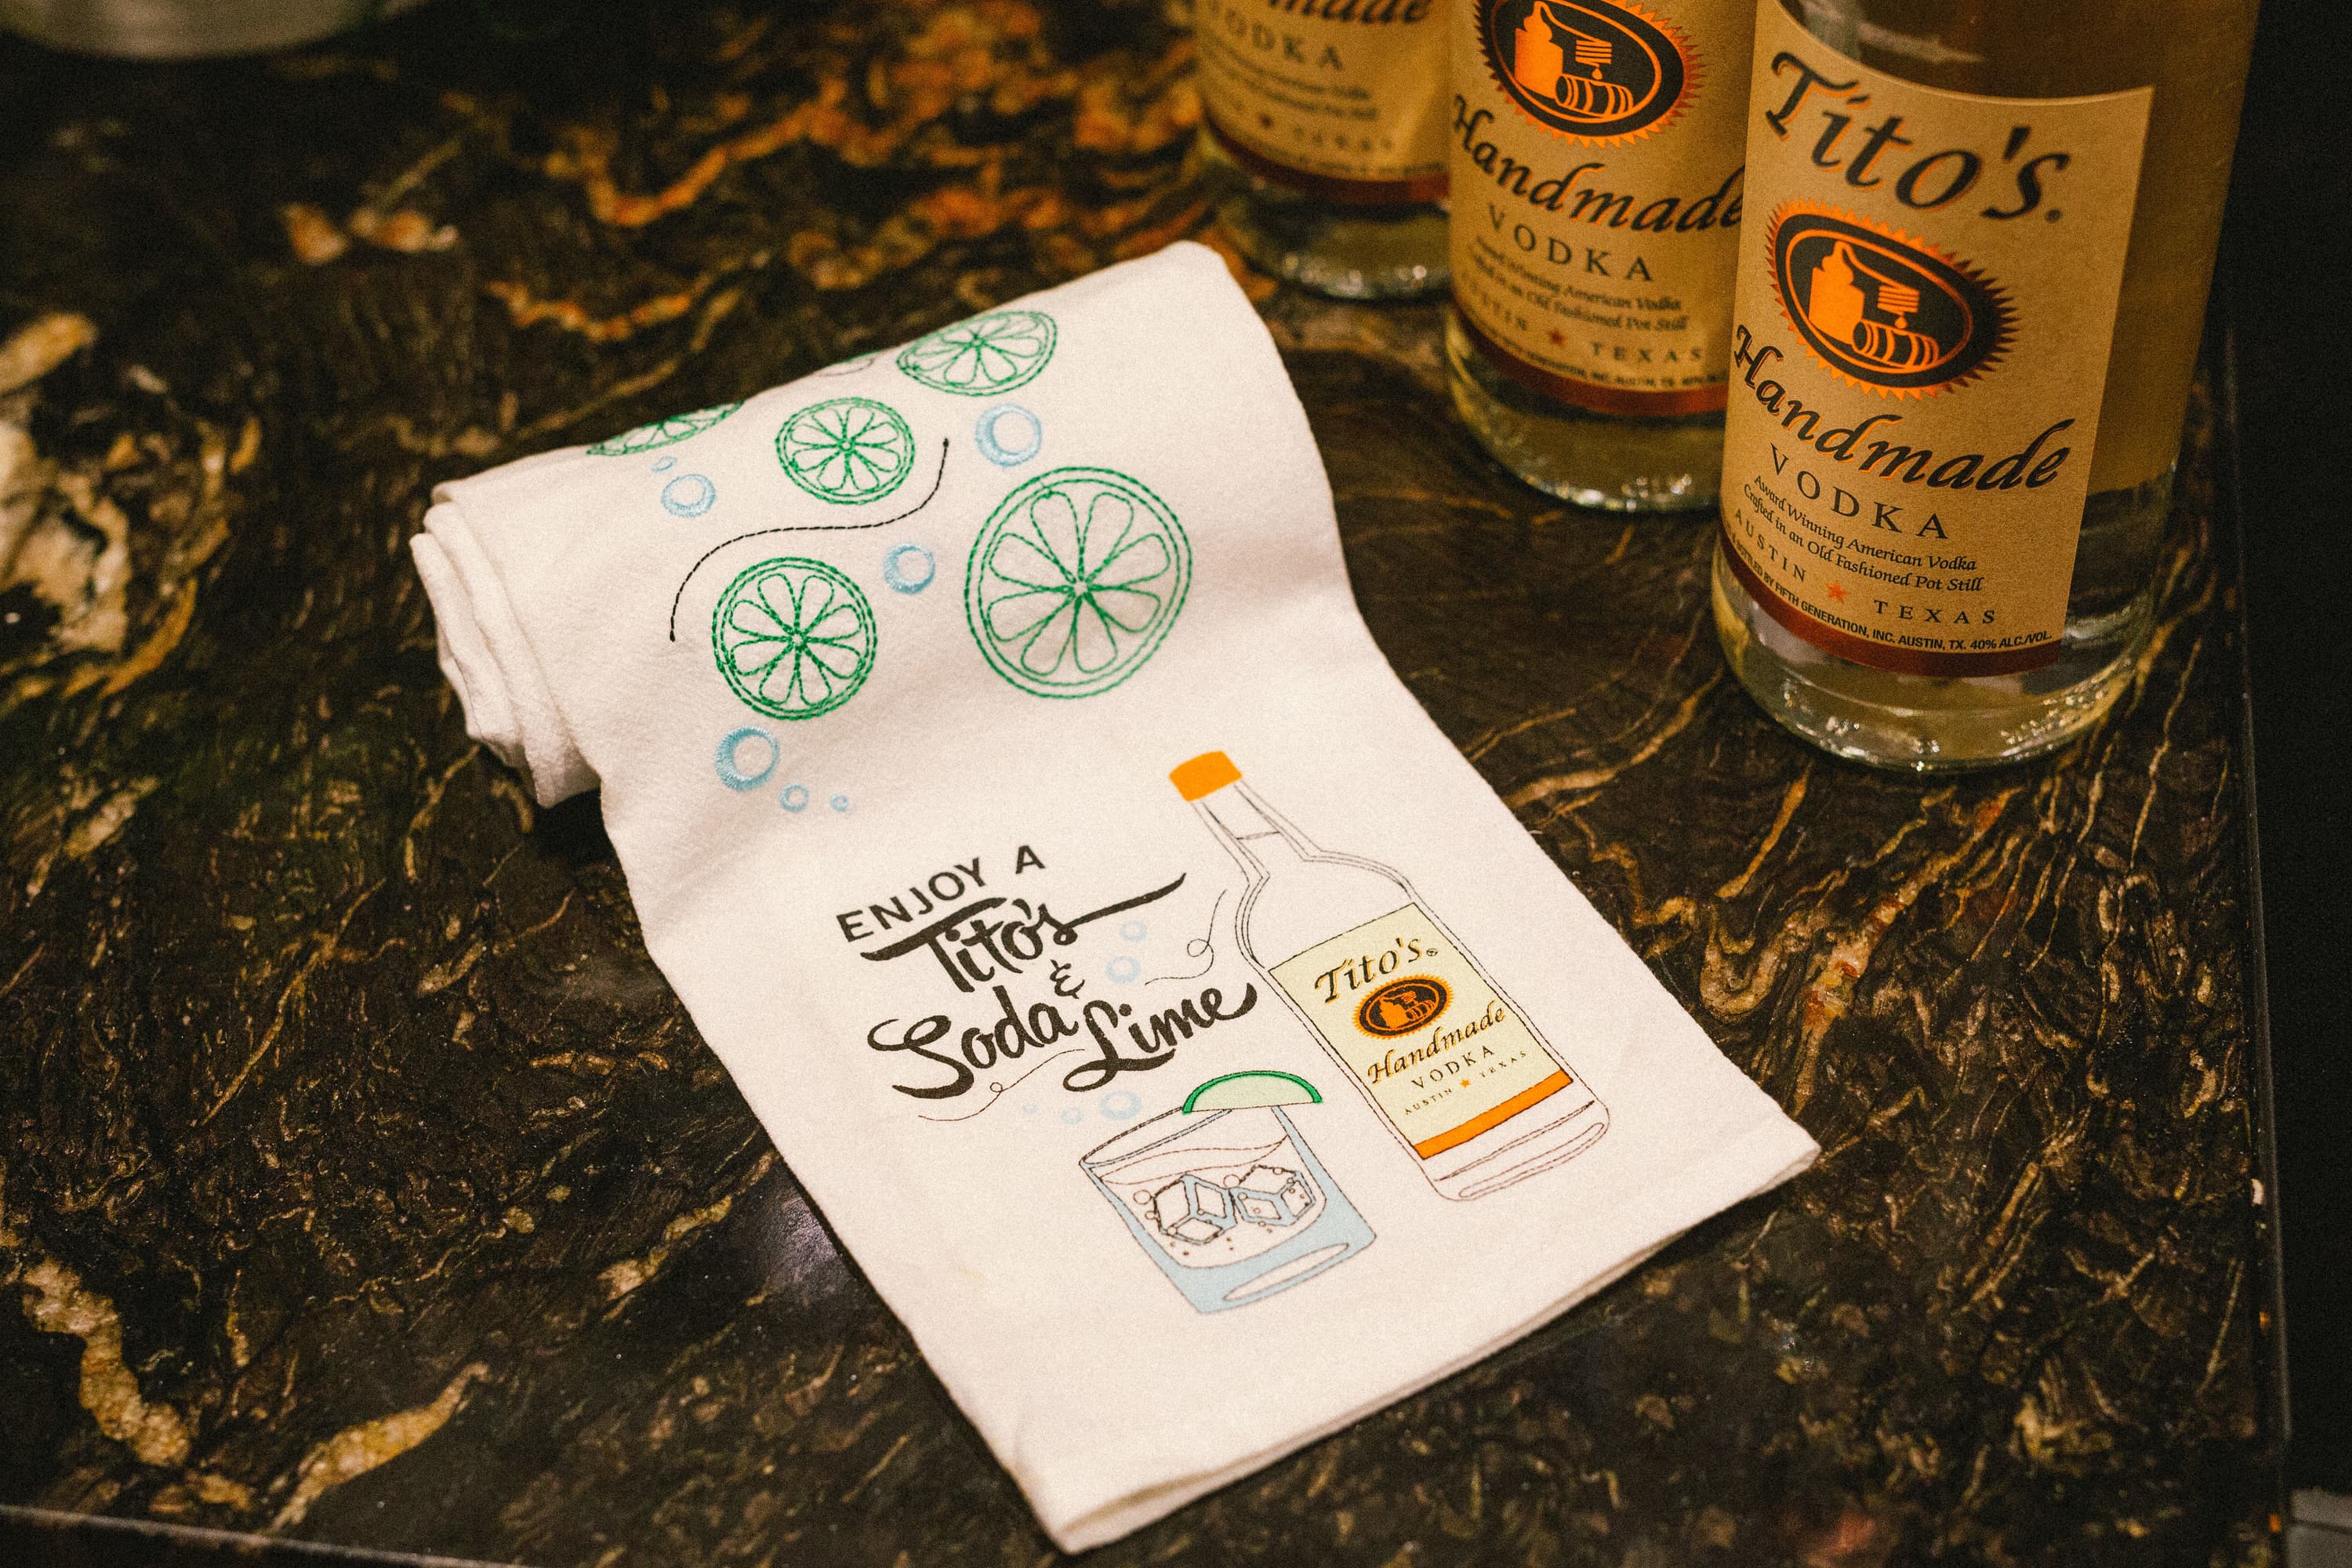 White tea towel with printed Enjoy a Tito’s Soda & Lime design and embroidered limes next to bottles of Tito's Vodka